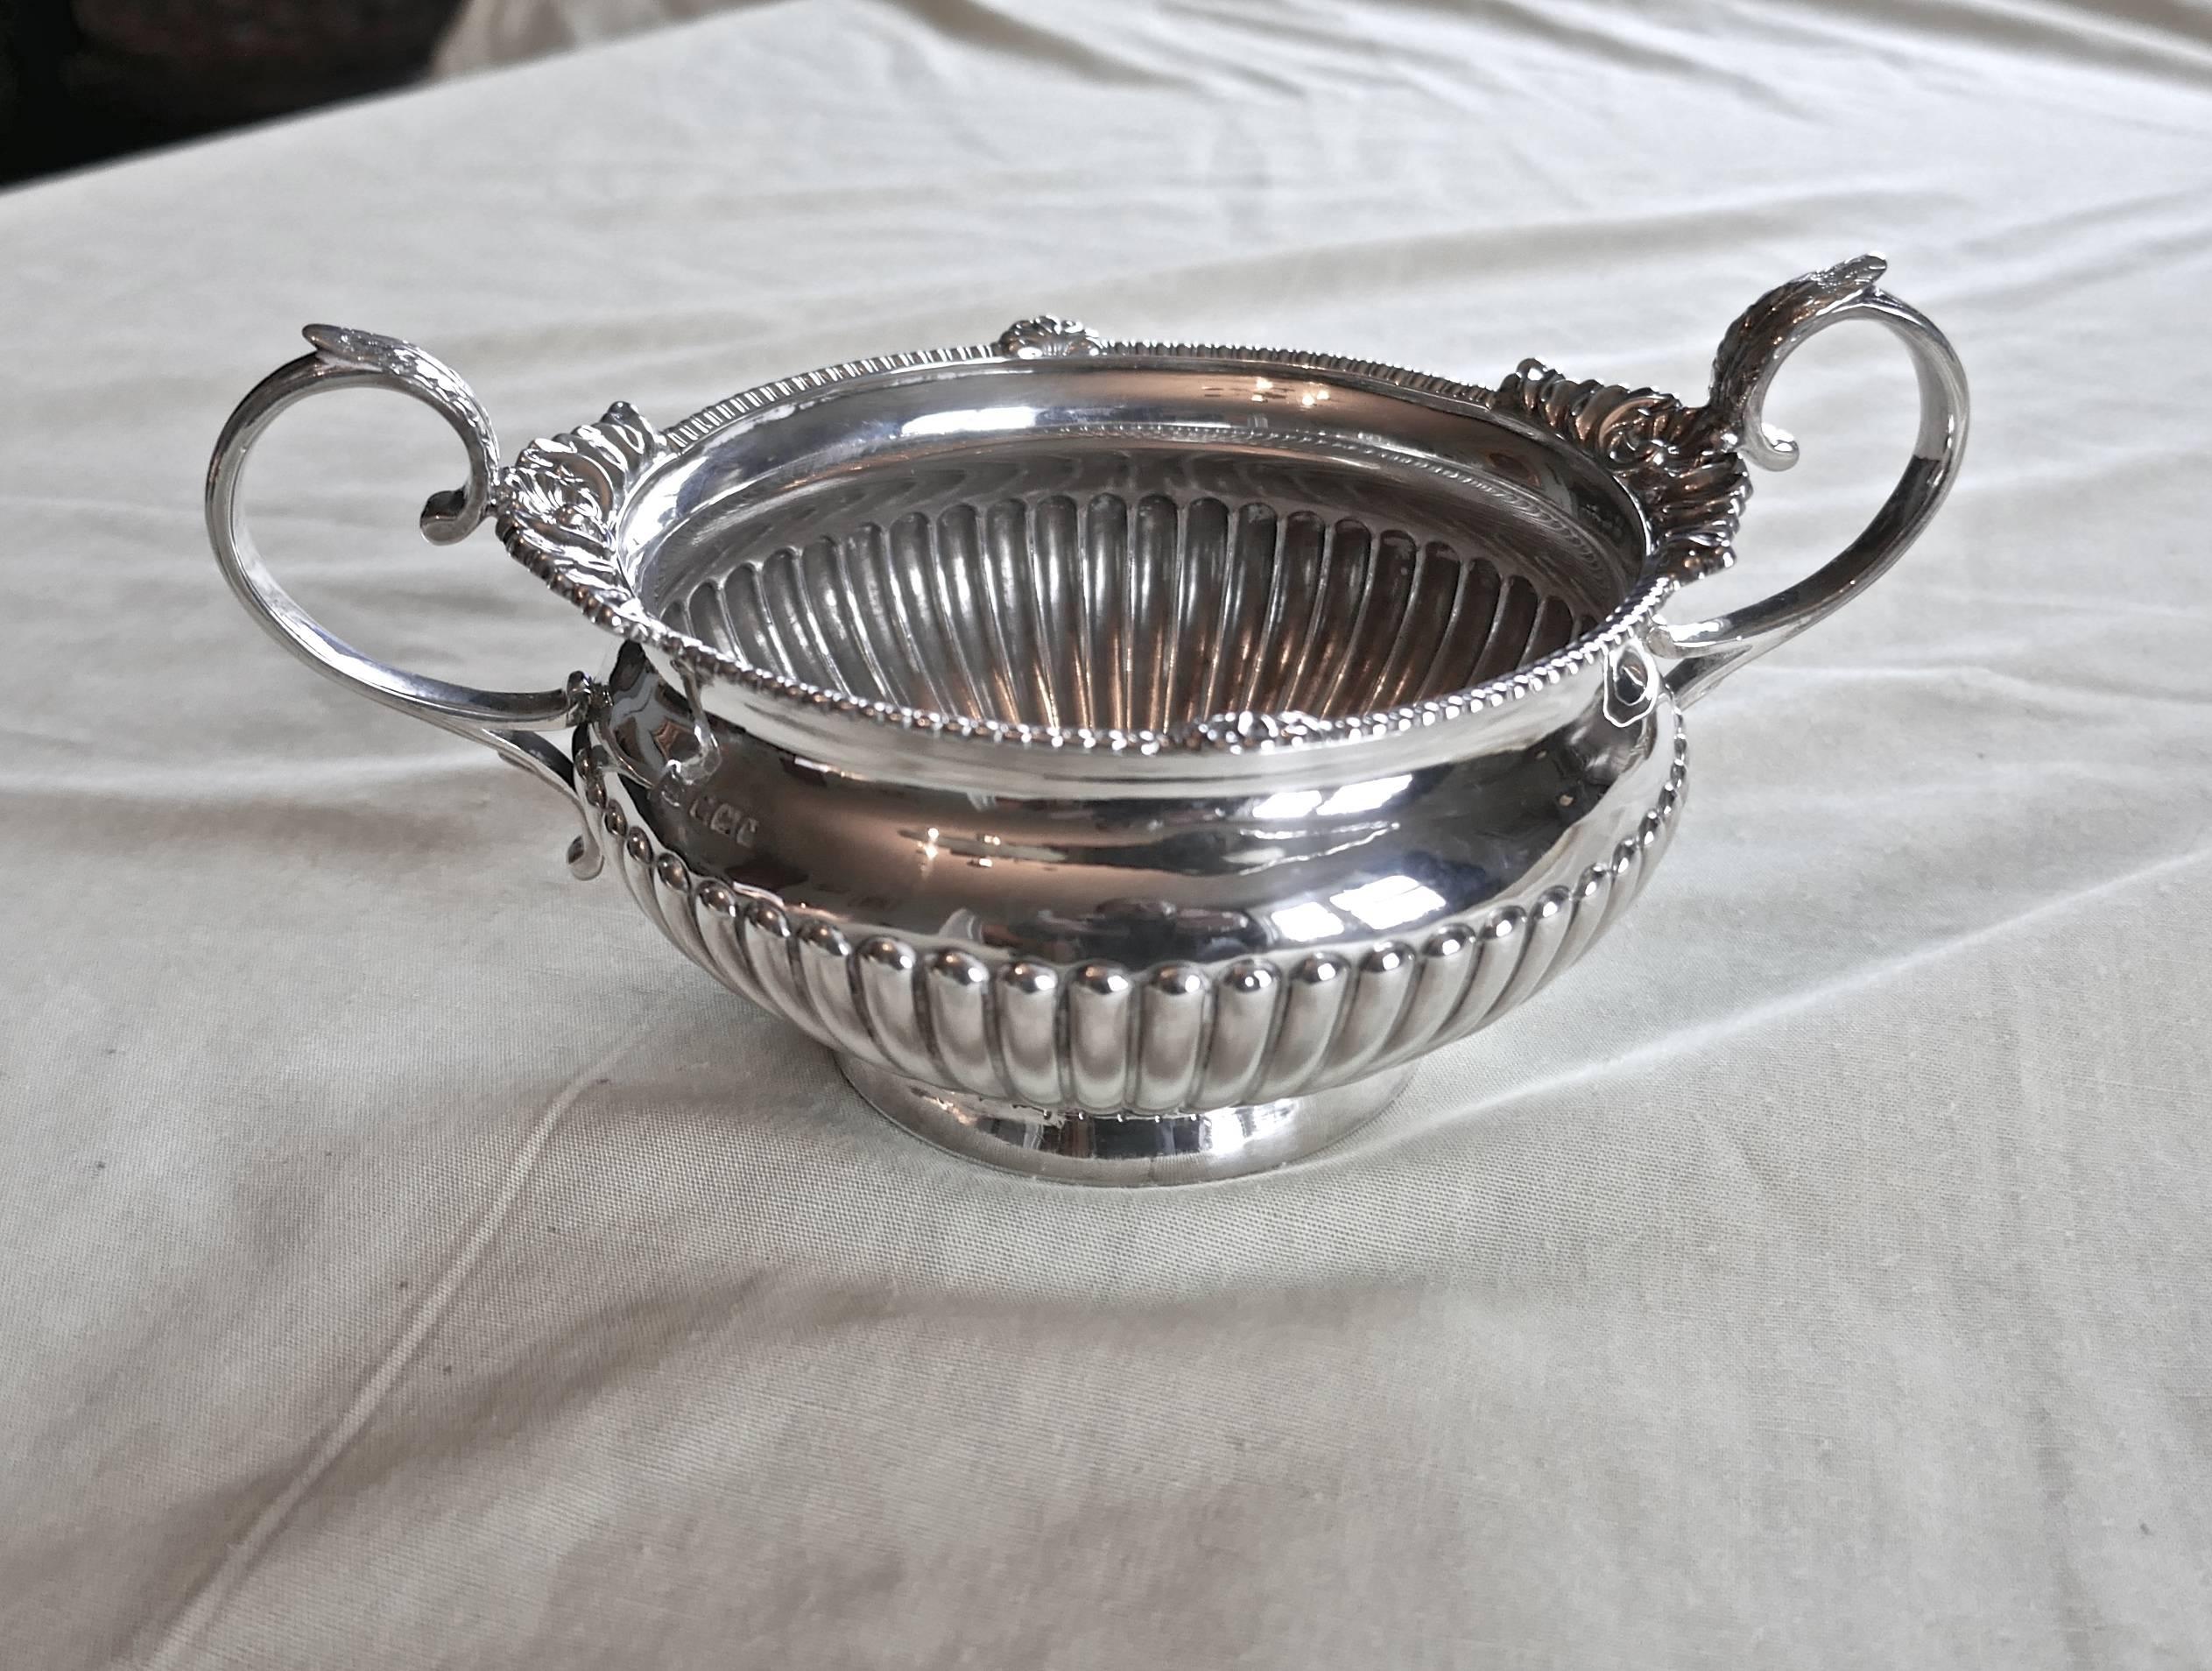 This is a superb quality hallmarked silver three-piece tea set by Walker & Hall, Sheffield, 1894
Each of the three pieces, teapot, jug and sugar bowl has a semi reeded lower half on plain rim base, the upper parts have a leaf capped scroll handle,